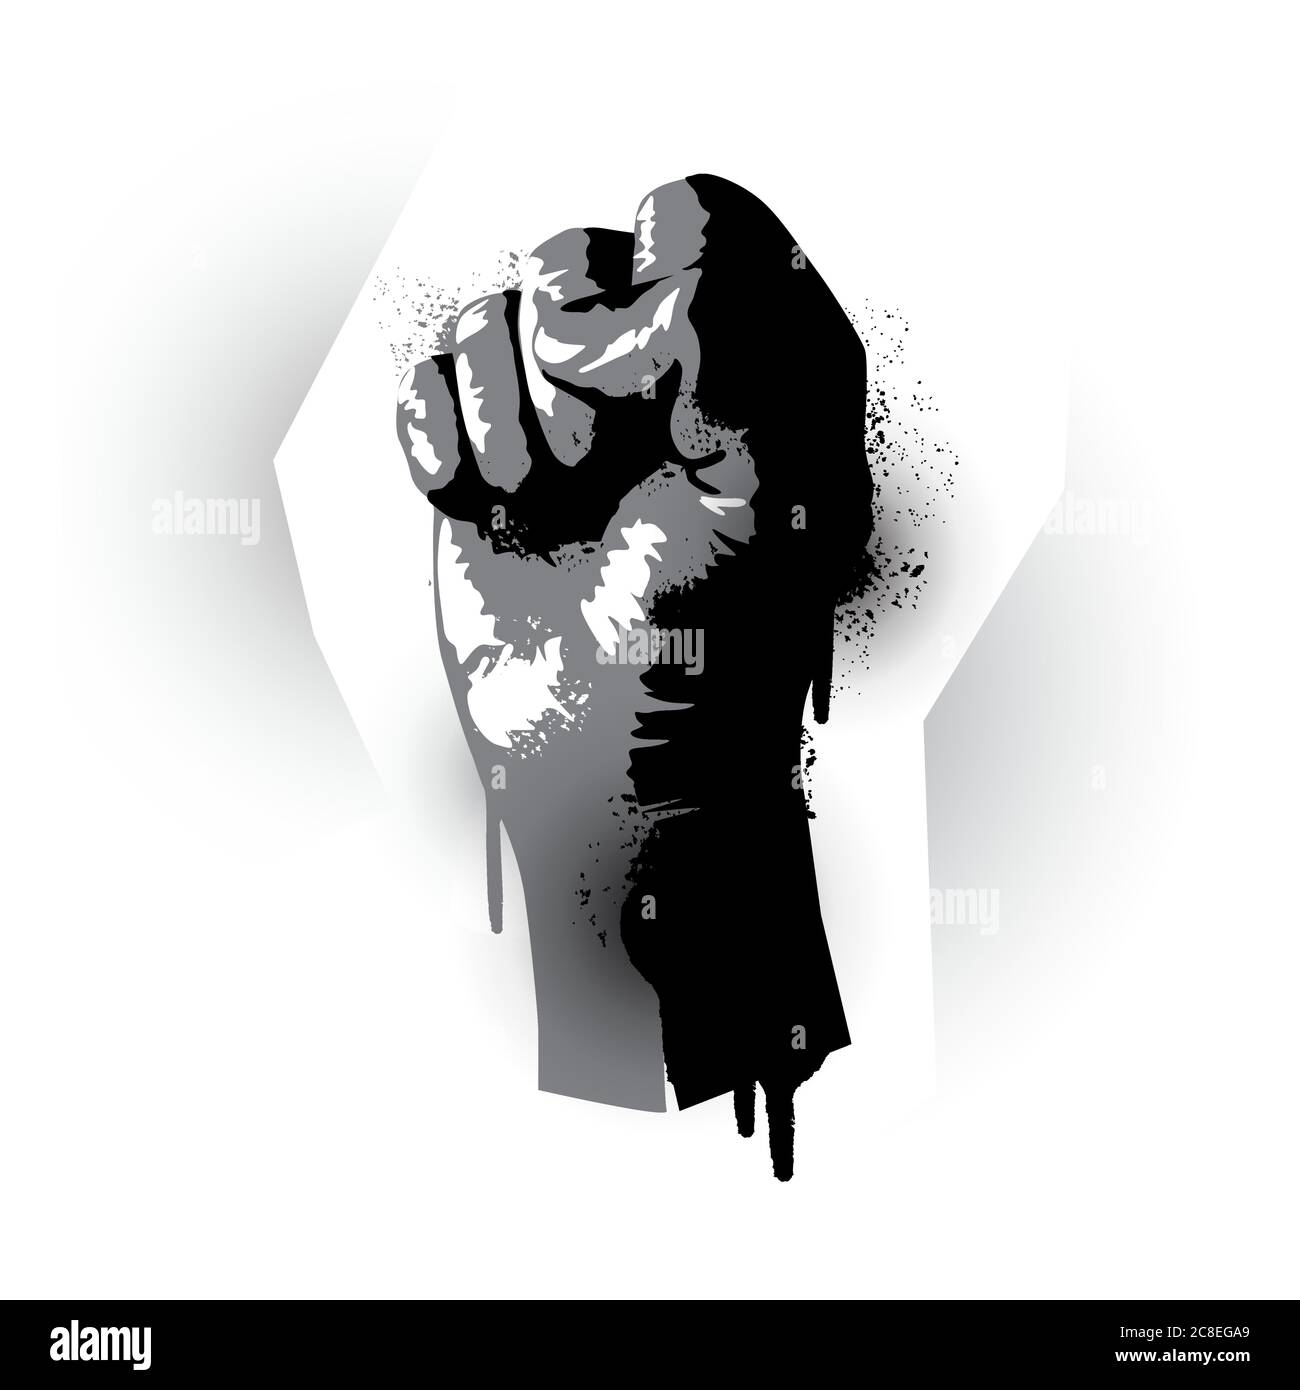 Stencil graffiti effect rising fist. Human rights, protest and demonstration vector illustration Stock Vector